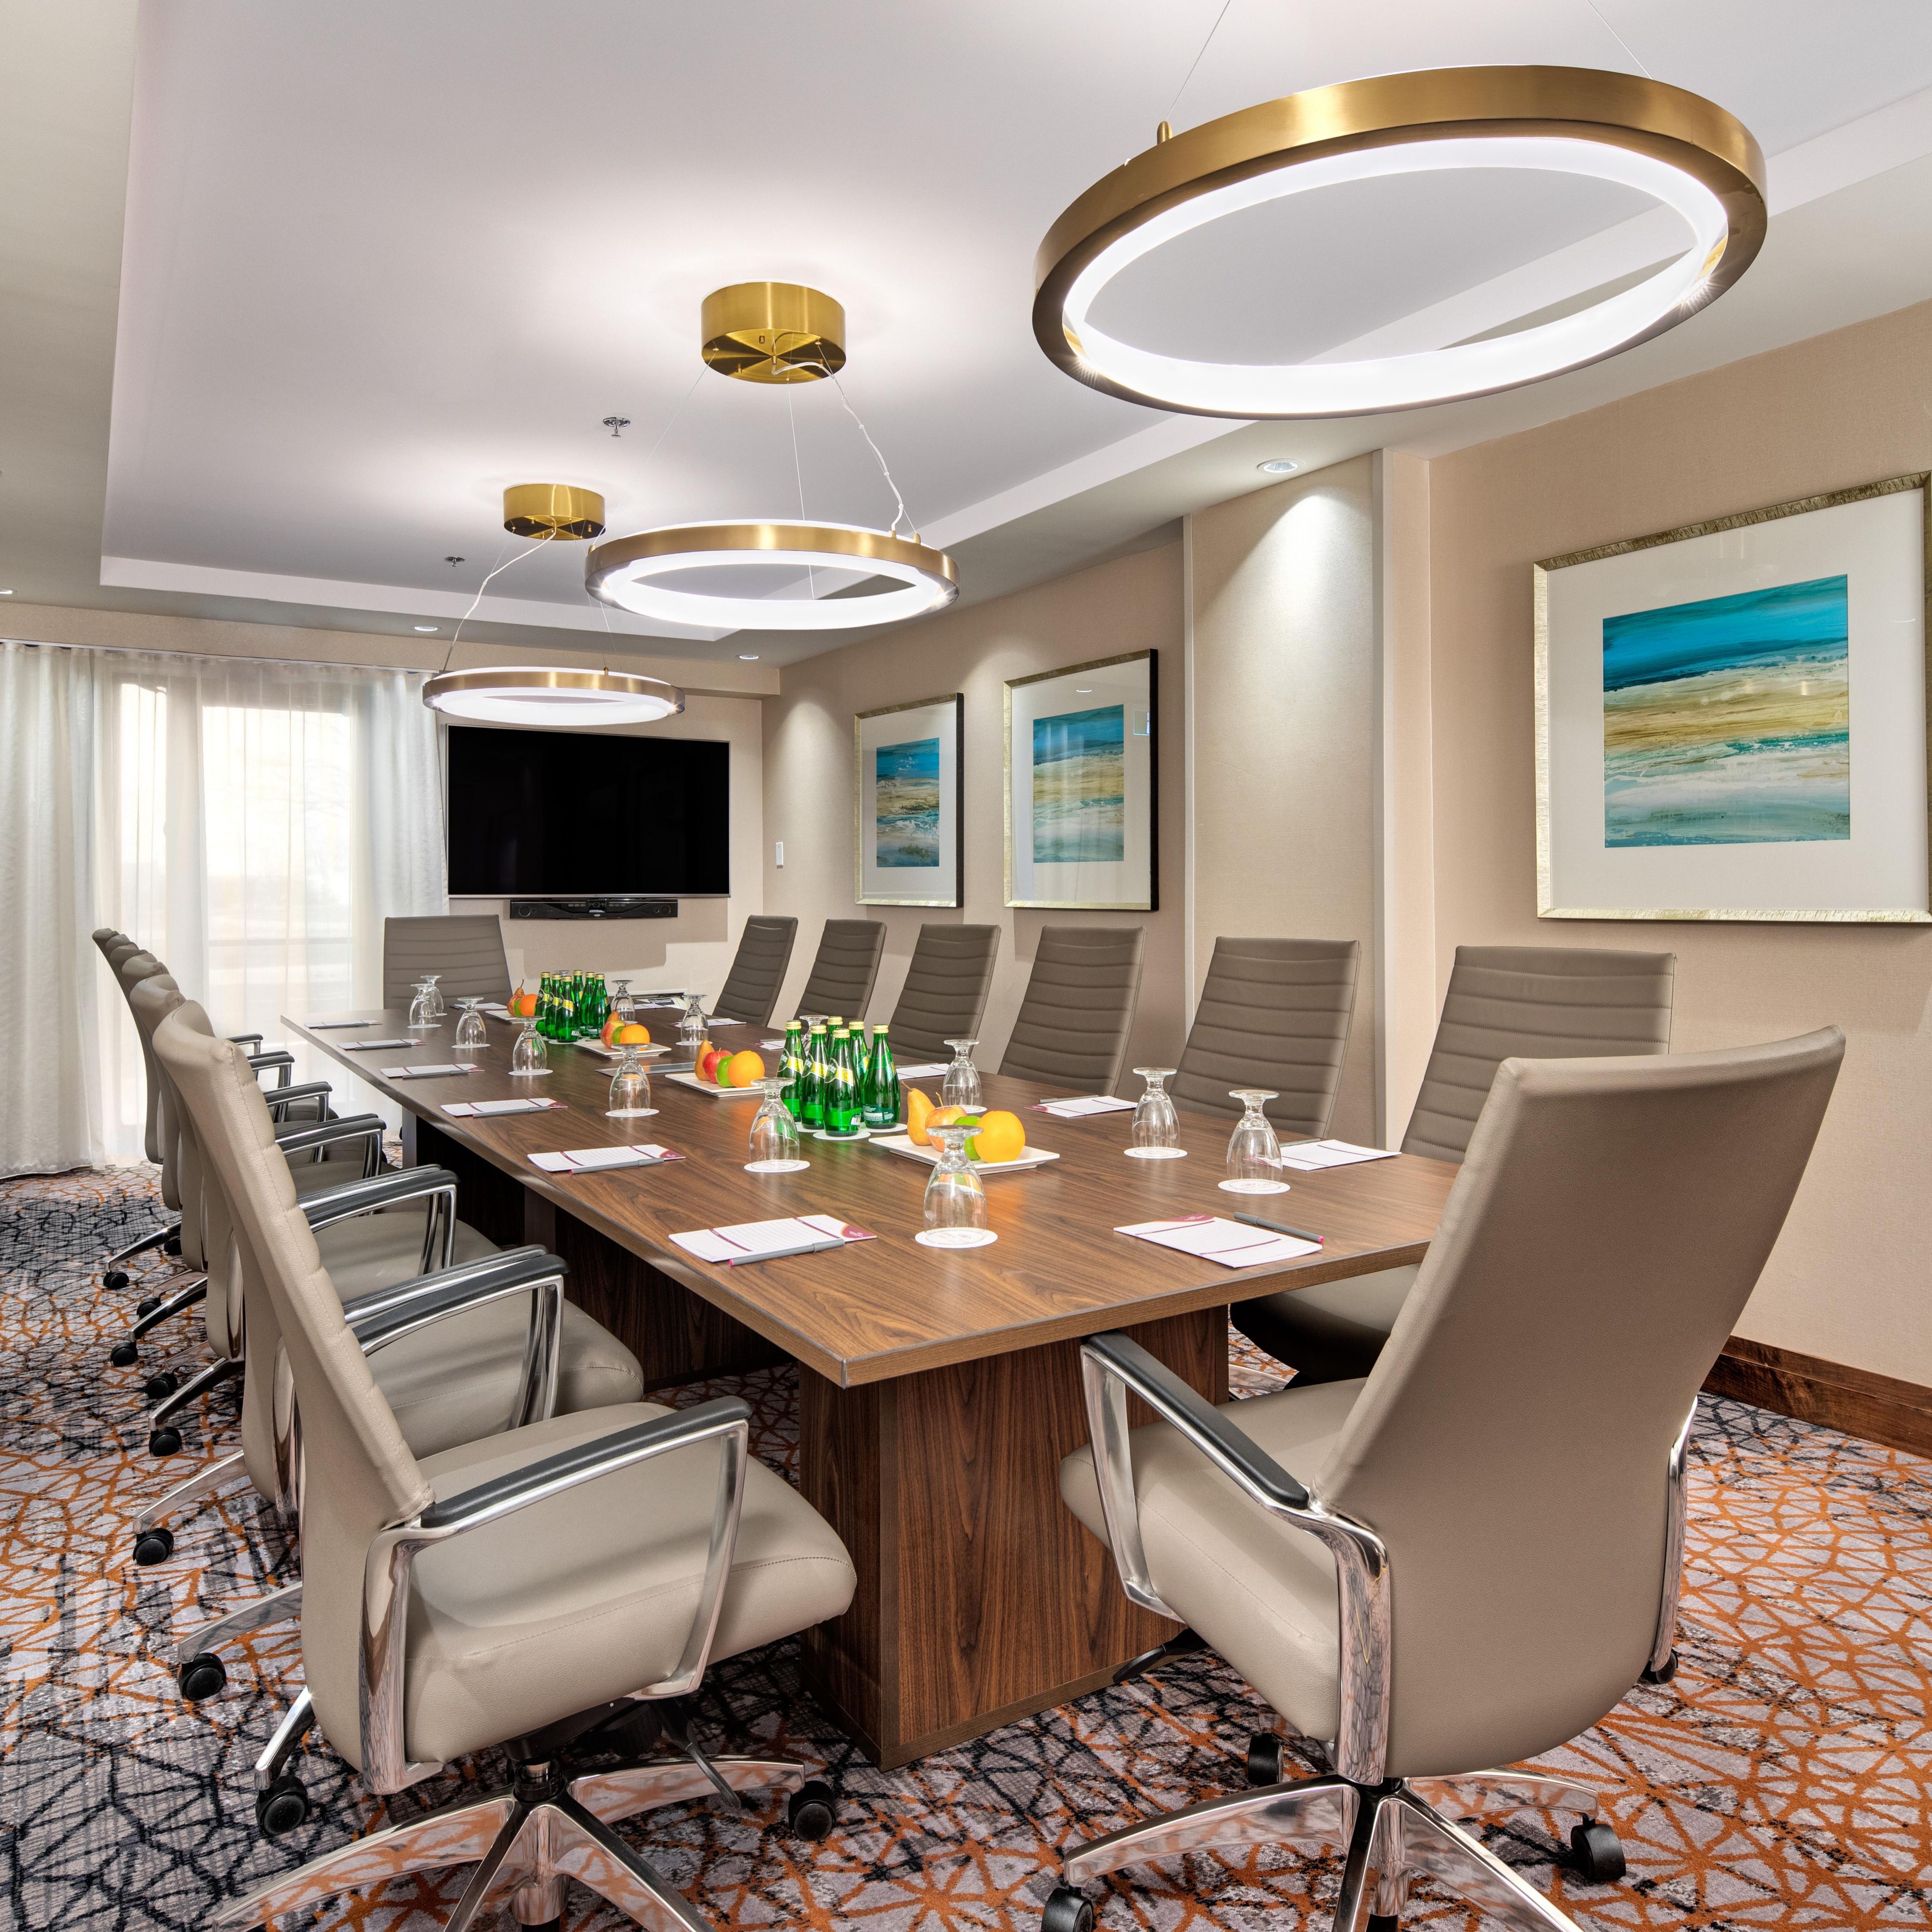 A fresh approach to meetings and events near Toronto or YYZ